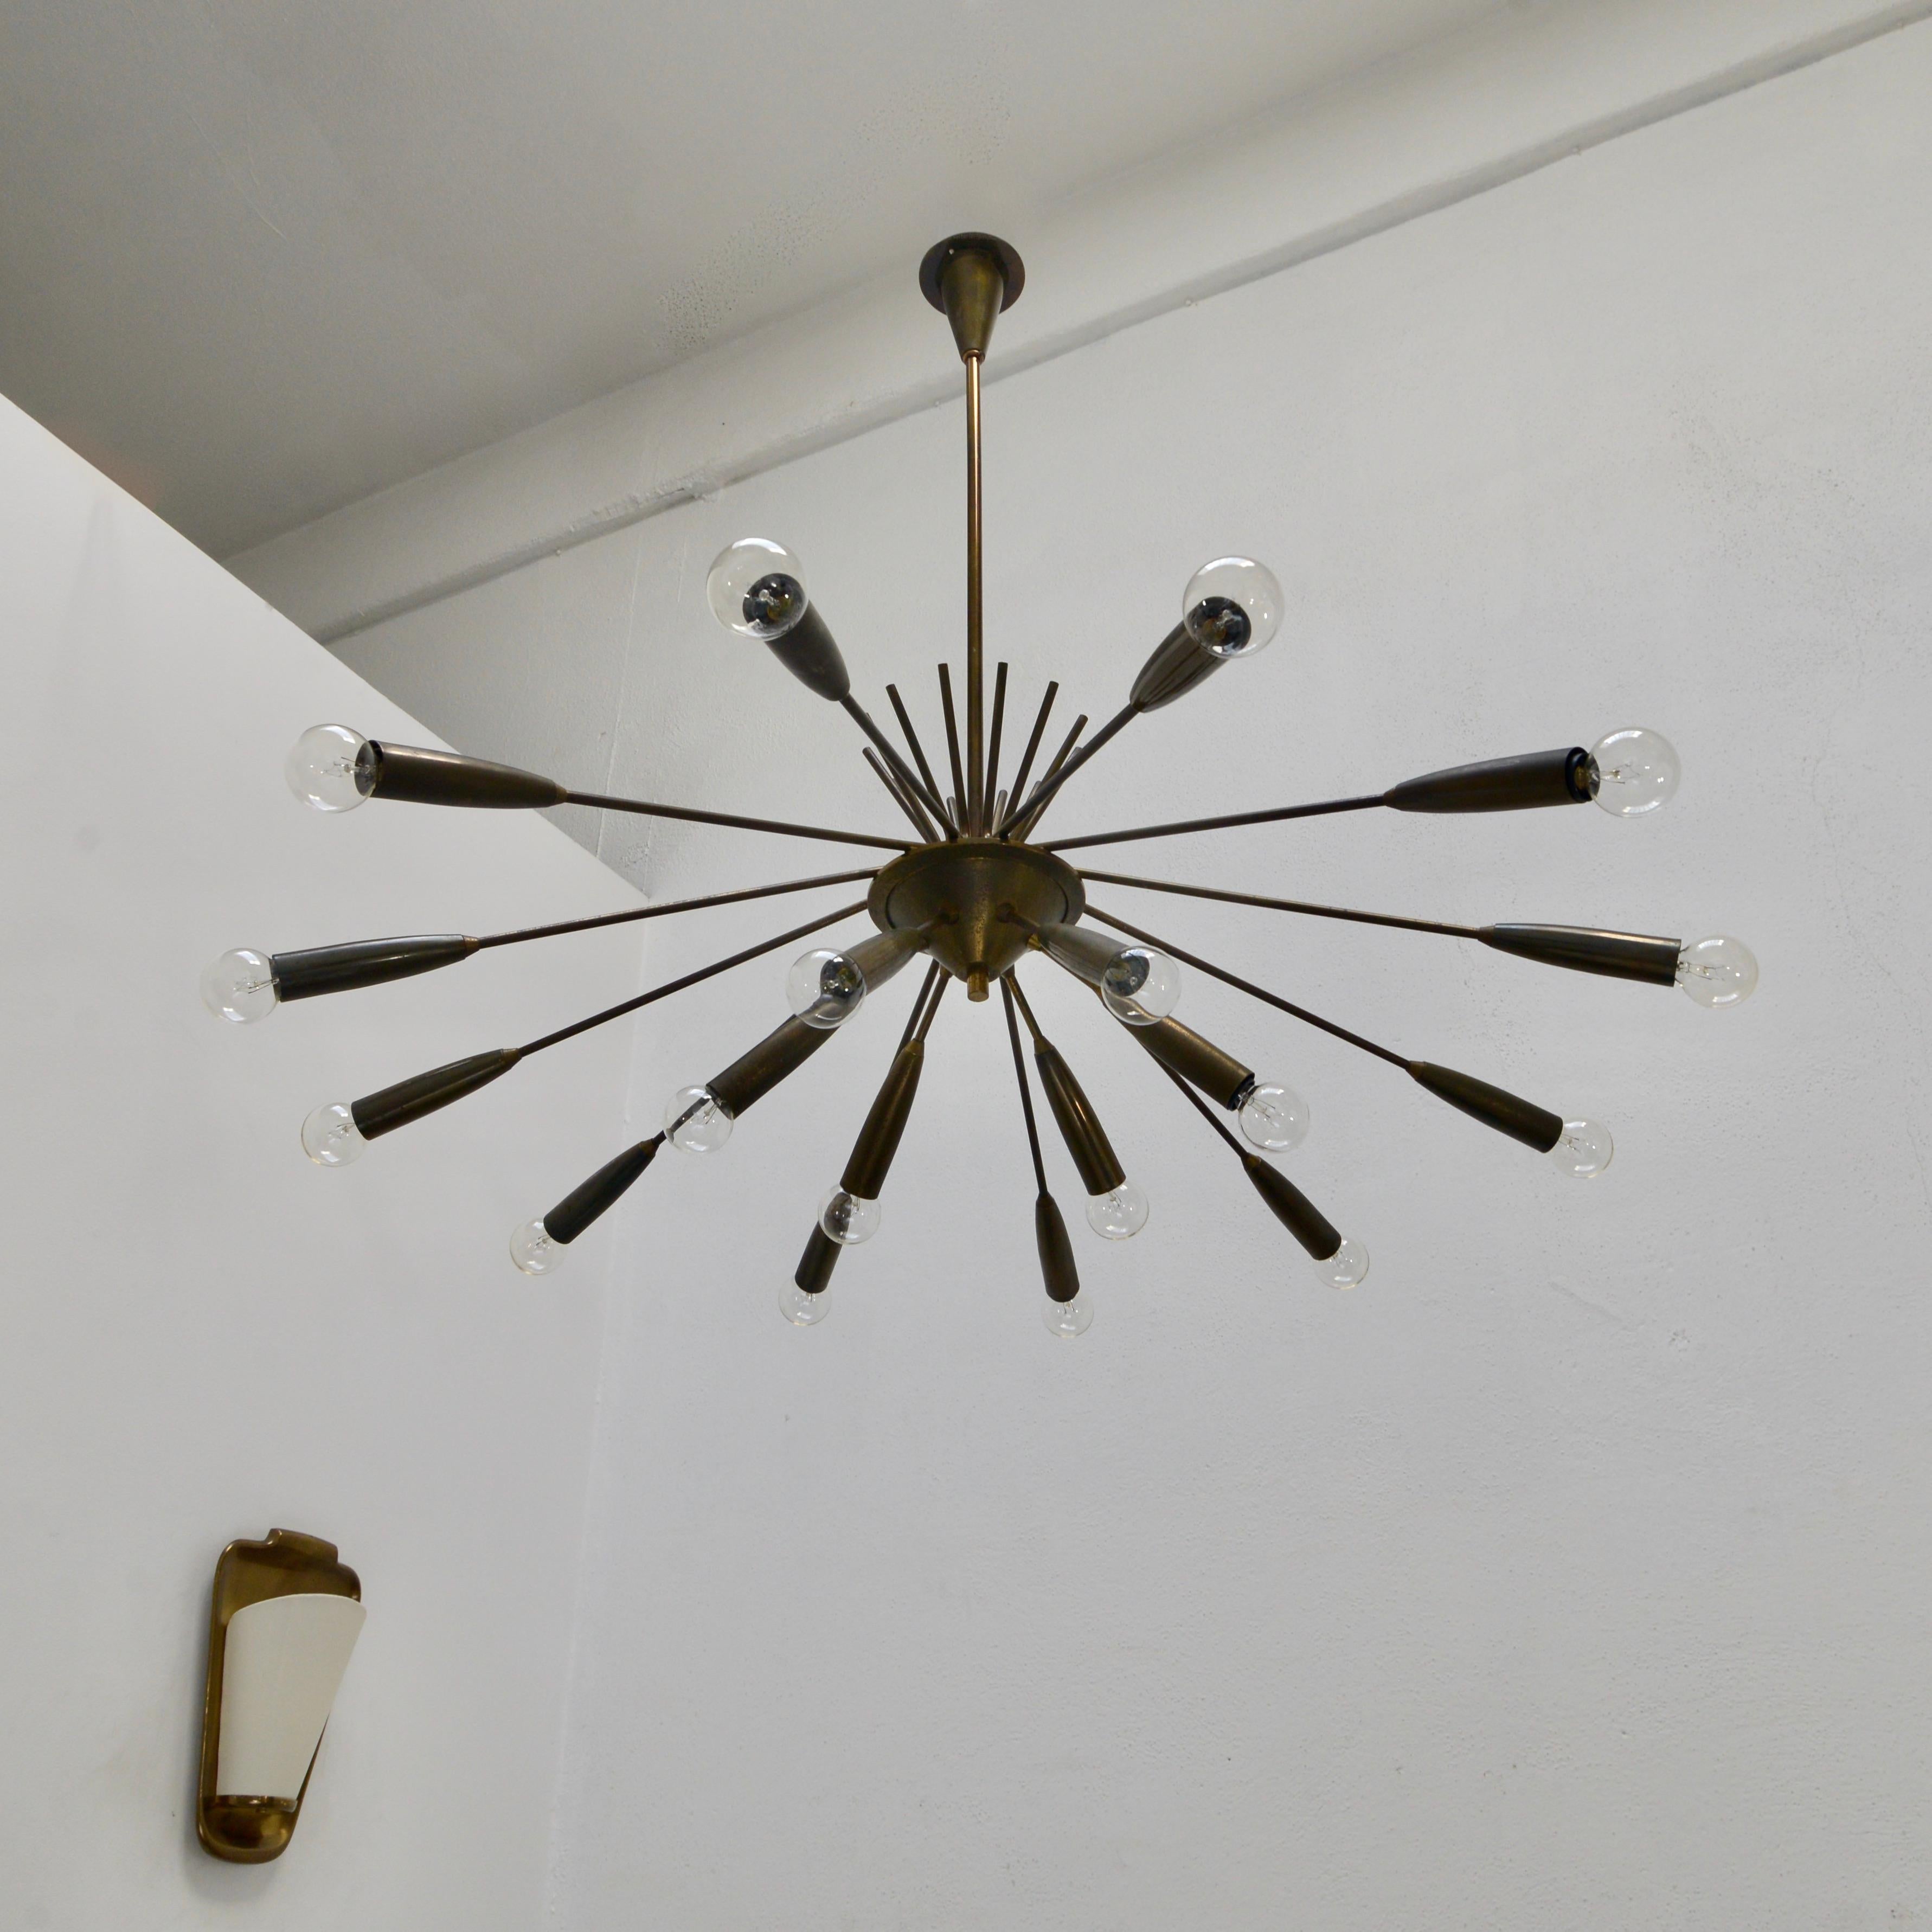 Stunning classical Mid-Century Modern Sputnik chandelier from 1950s, Italy. 16-arm, naturally aged all brass chandelier with original finish. Rewired for use in the USA with 16 E12 candelabra based sockets. Light bulbs included with